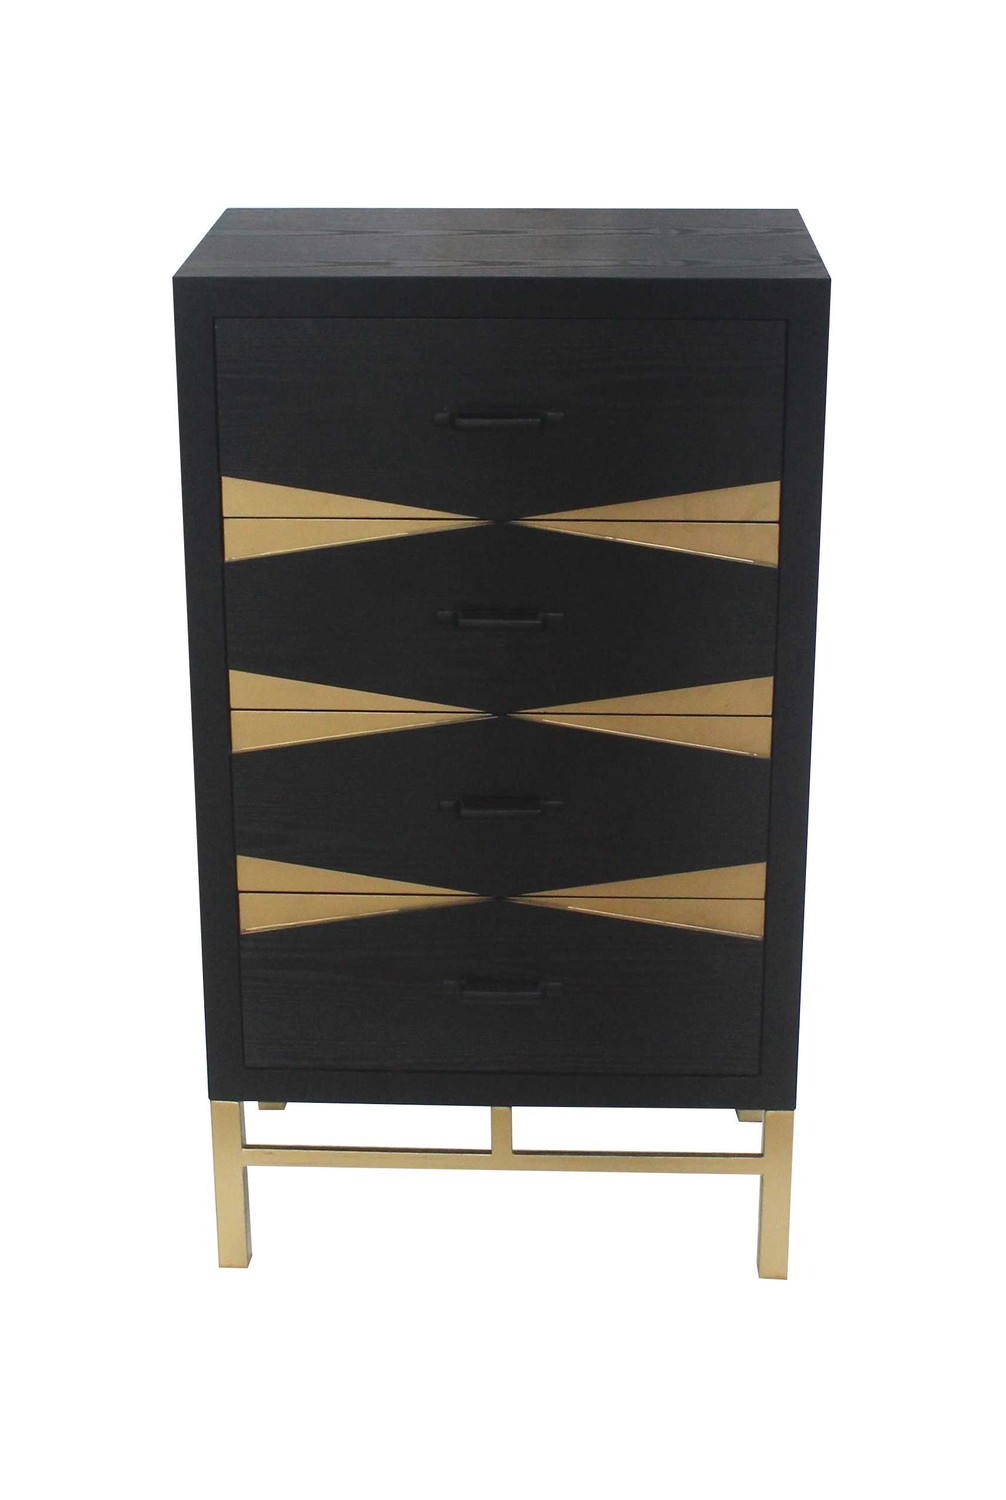 14" x 23" x 40" Black & Gold 4 Drawer Side Table